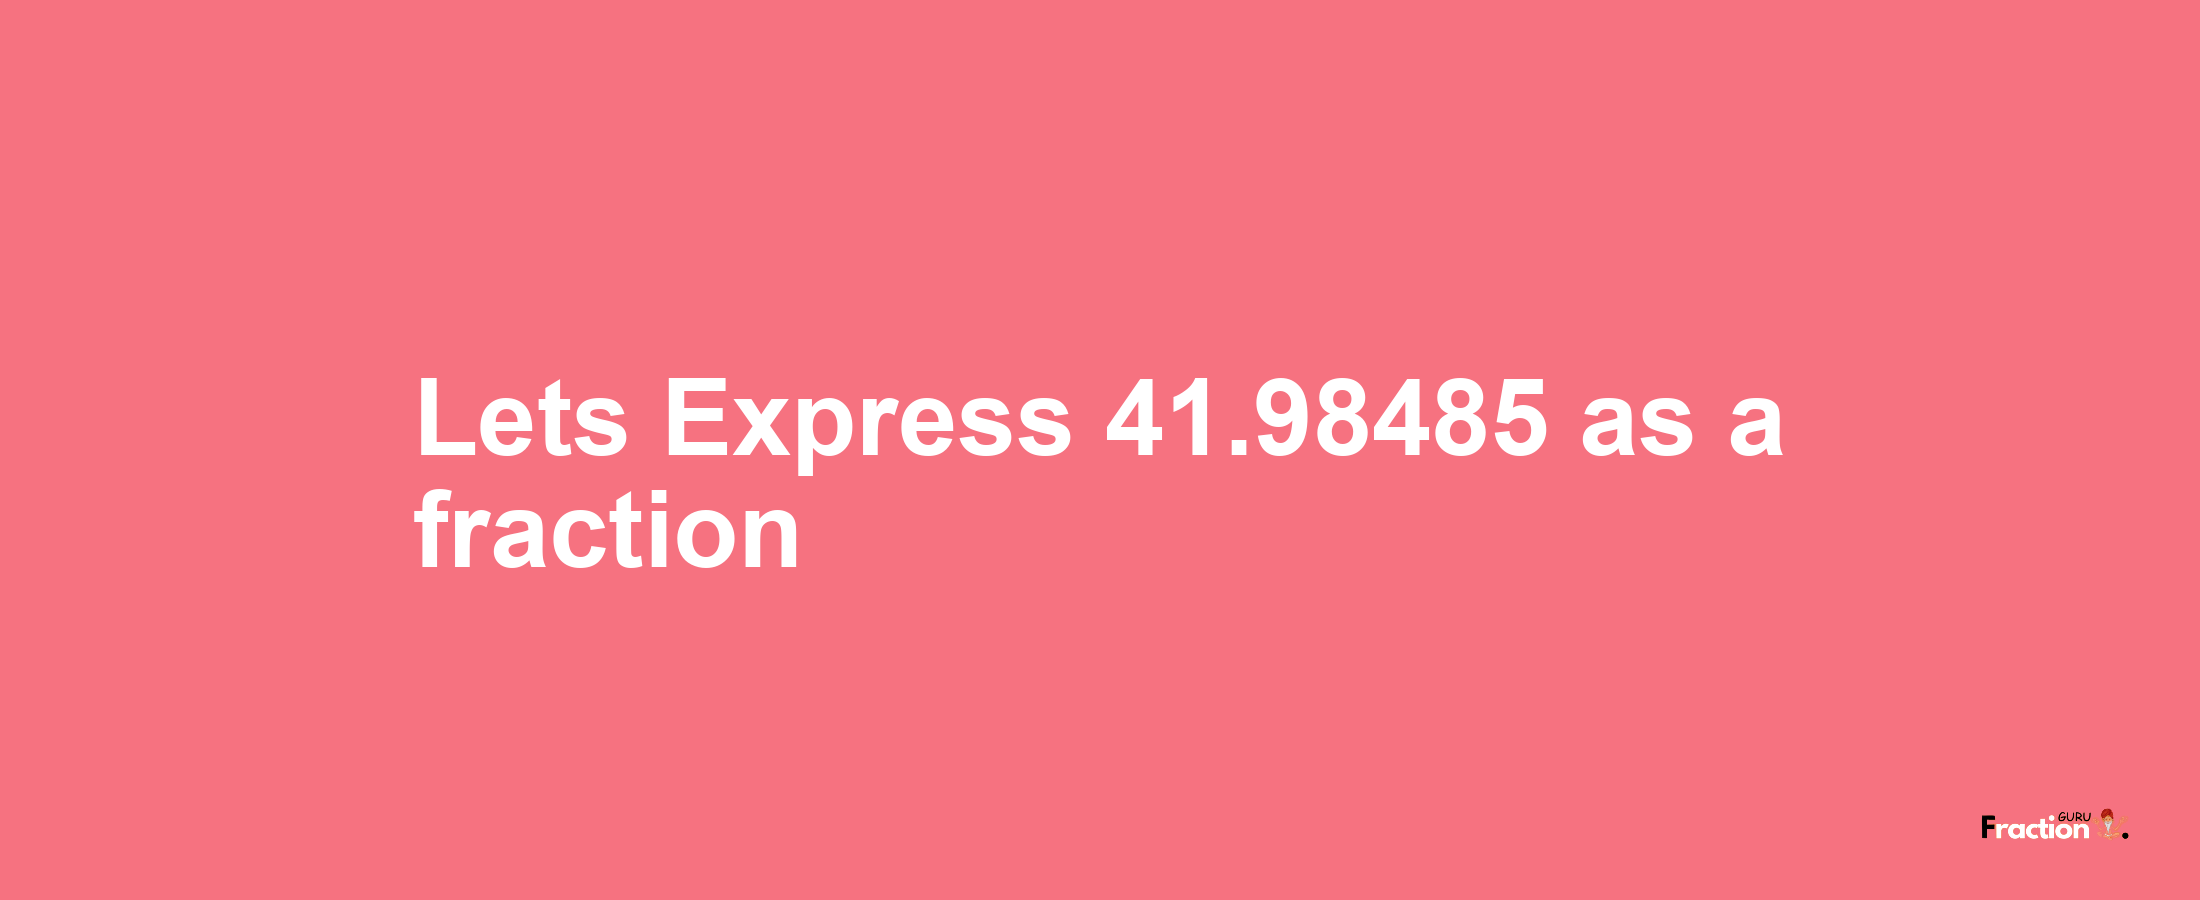 Lets Express 41.98485 as afraction